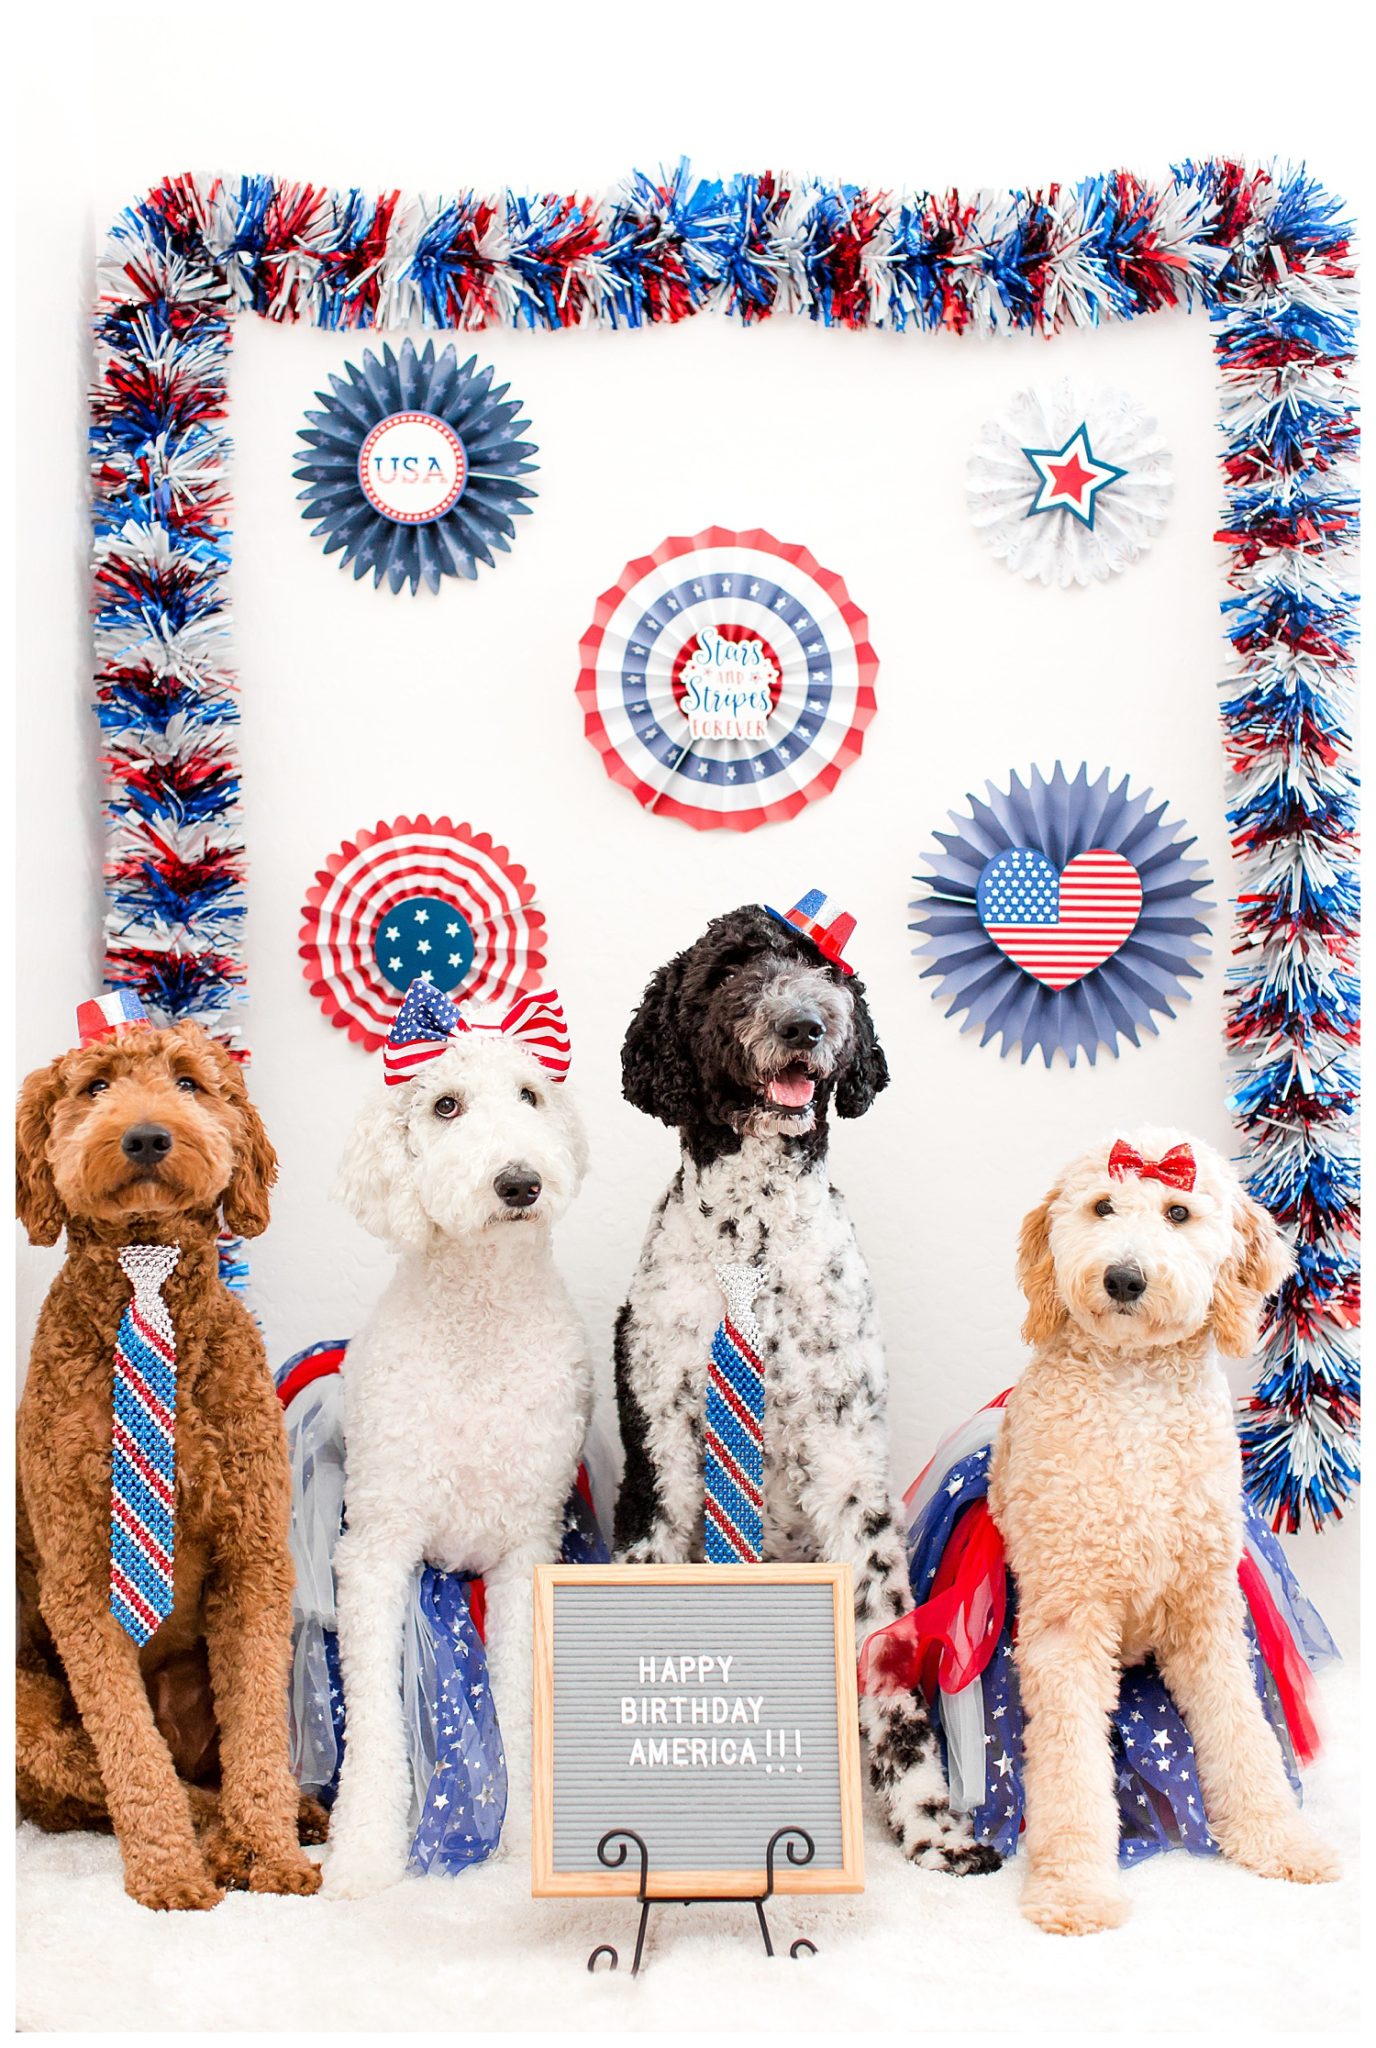 Phoenix wedding photographer, red, white and blue, USA,fourth of July goldendoodle pictures, kids with dogs, kids. with goldendoodles, red goldendoodle, black goldendoodle, black and white goldendoodle, white goldendoodle, gold goldendoodle, poodle mix, dogs celebrating American independence